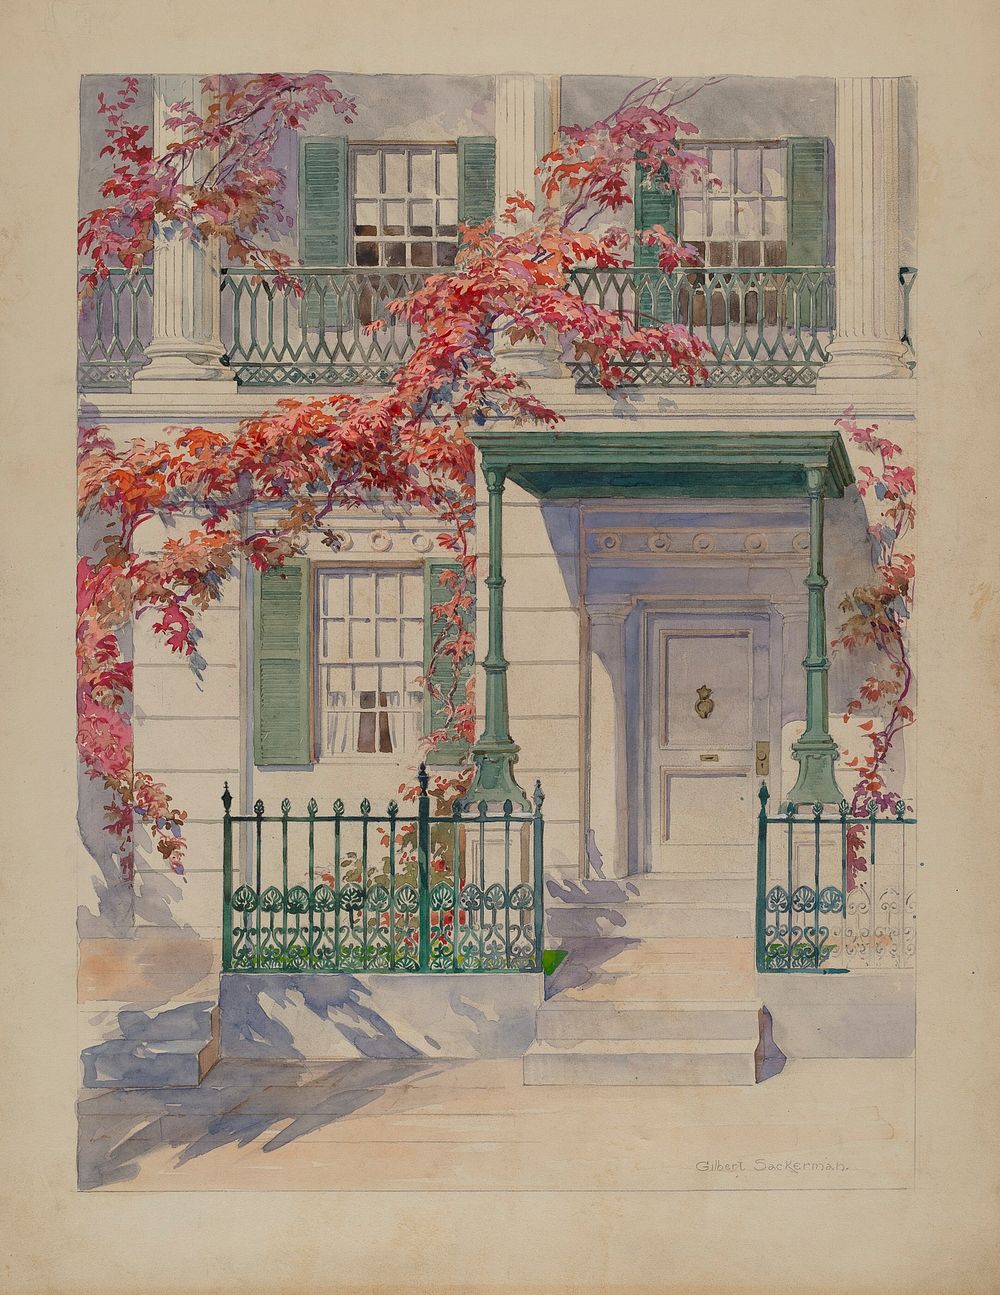 Ornamental Iron (c. 1936) by Gilbert Sackerman. Original from The National Gallery of Art.